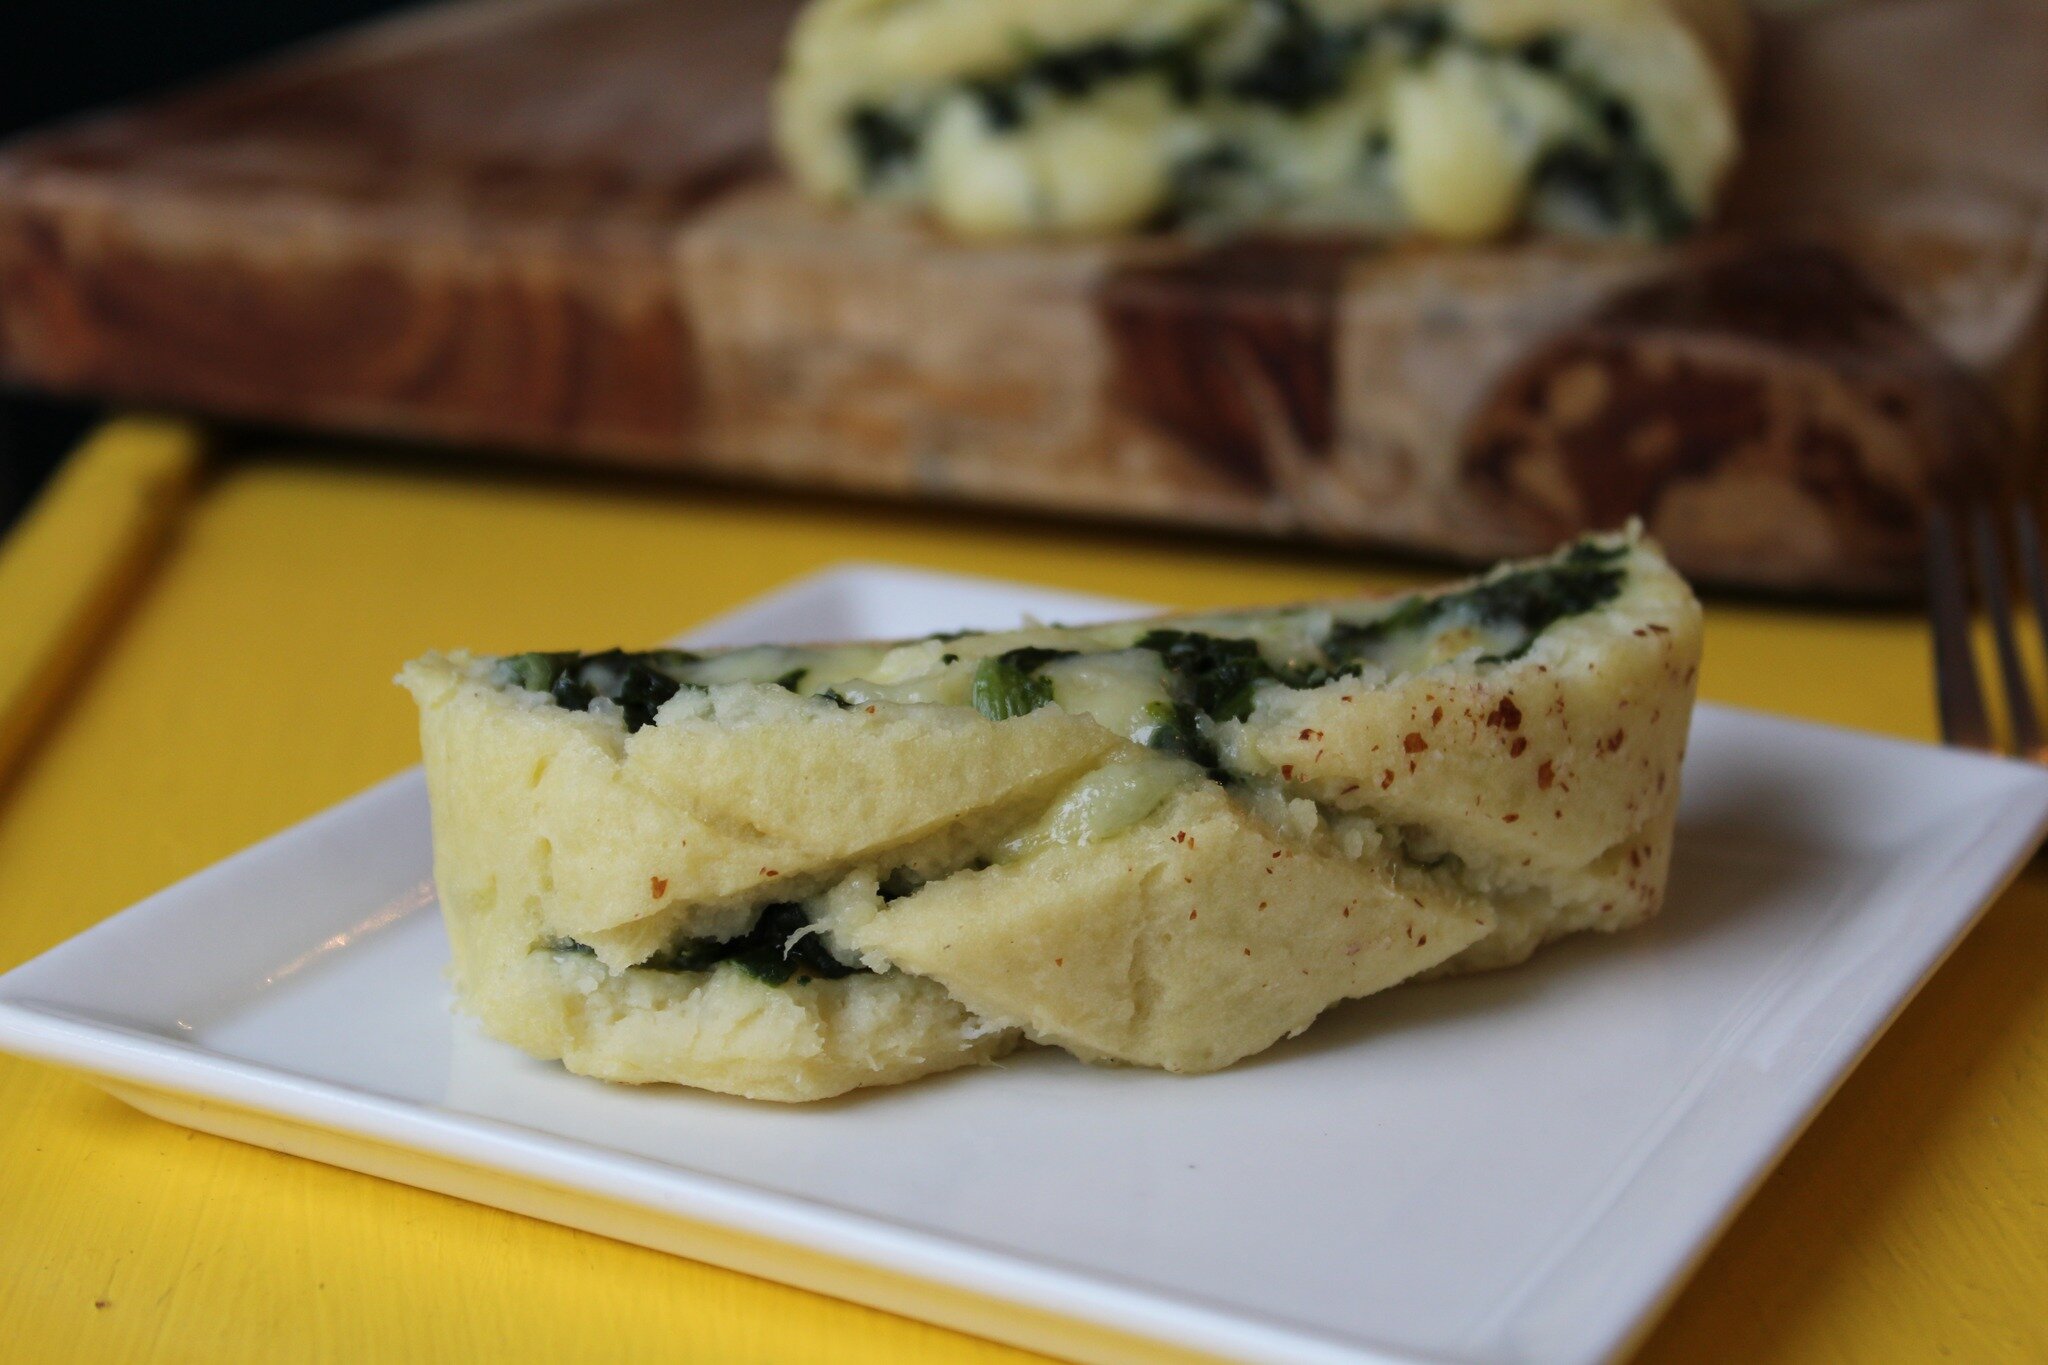 ✨Recipe Post✨

Cheesy Potato And Spinach Roll - Rotolo di Patate, Spinaci e Formaggio

This is such a delicious treat...and it feels perfect for this time of year too! It would make a wonderful addition to an Easter lunch :)

Recipe on my blog LifeLe